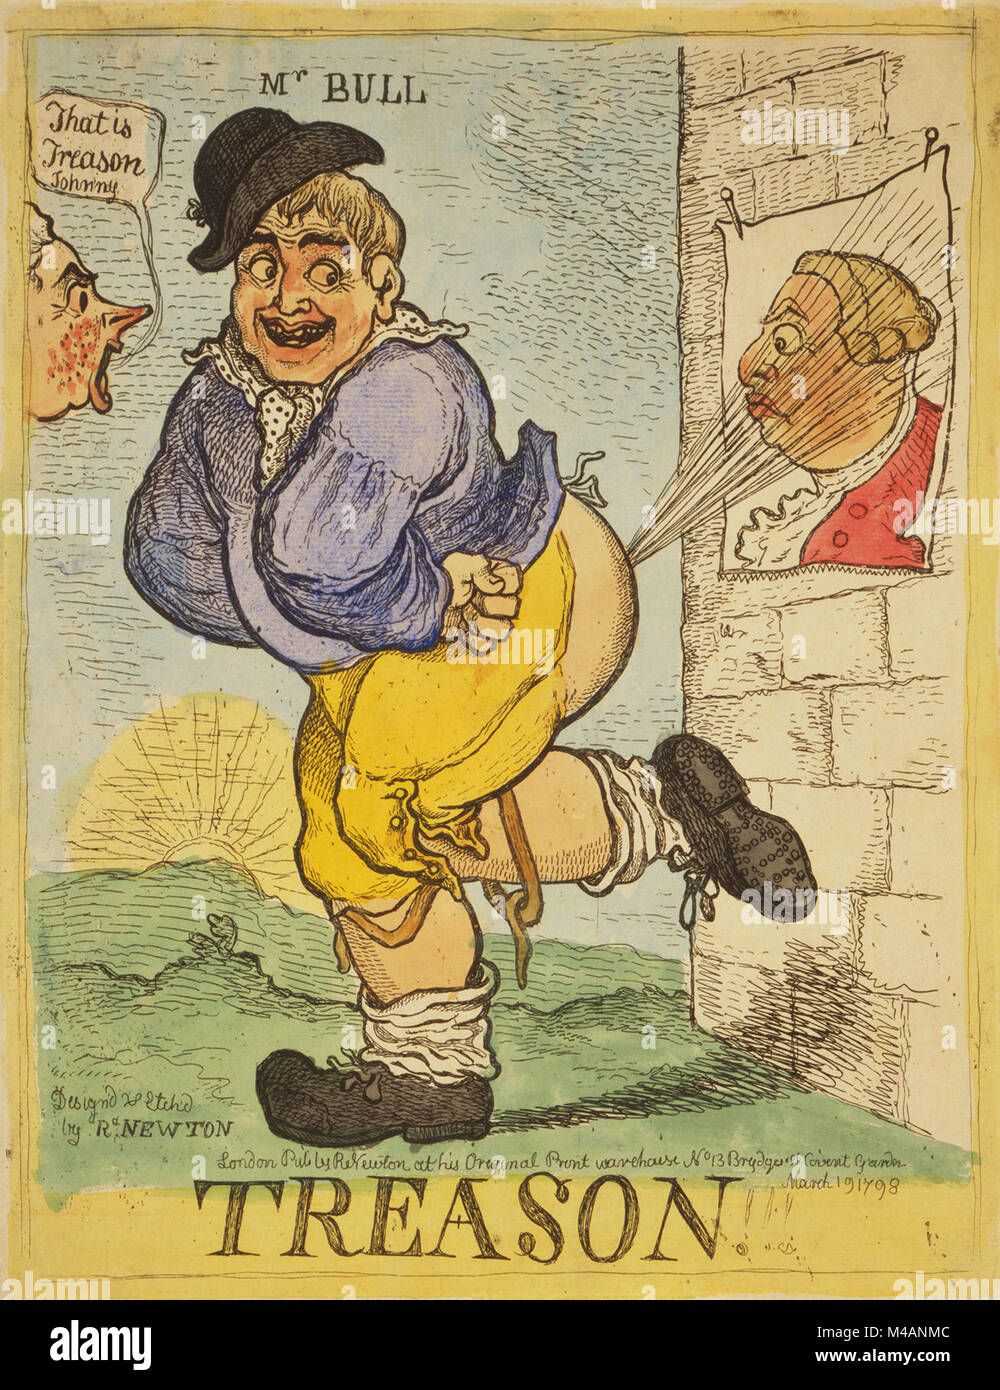 Treason!!! by Richard Newton published 1798. A stout, smiling John Bull directs a blast from his rear-end toward a poster of King George III tacked to a wall. The image of the king looks suprised. On the left, the head of William Pitt exclaims, 'That is Treason Johnny'. Stock Photo